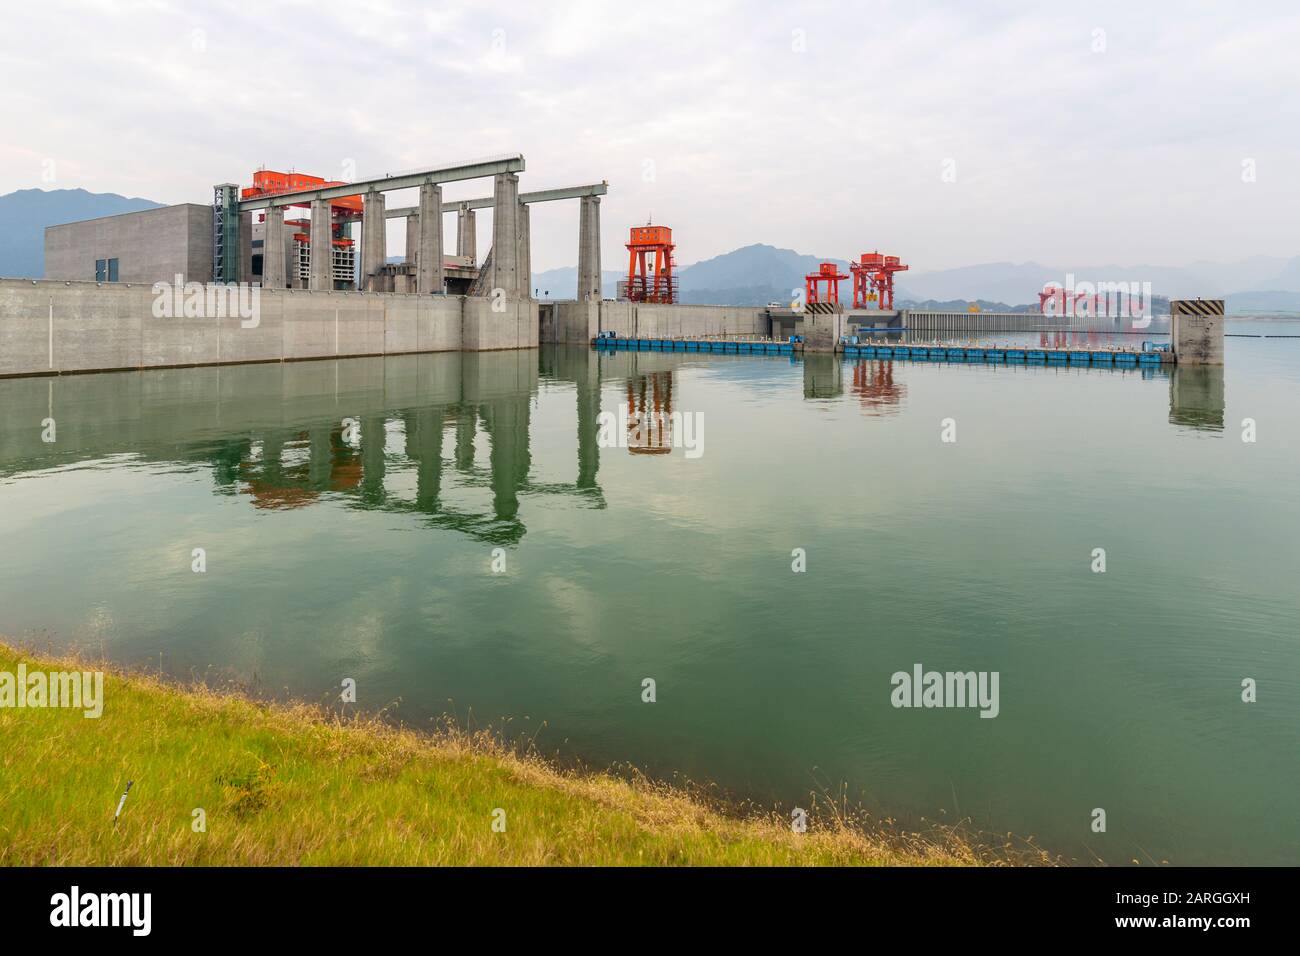 View of The Three Gorges Dam and visitors centre at Sandouping, Sandouping, Hubei, China, Asia Stock Photo